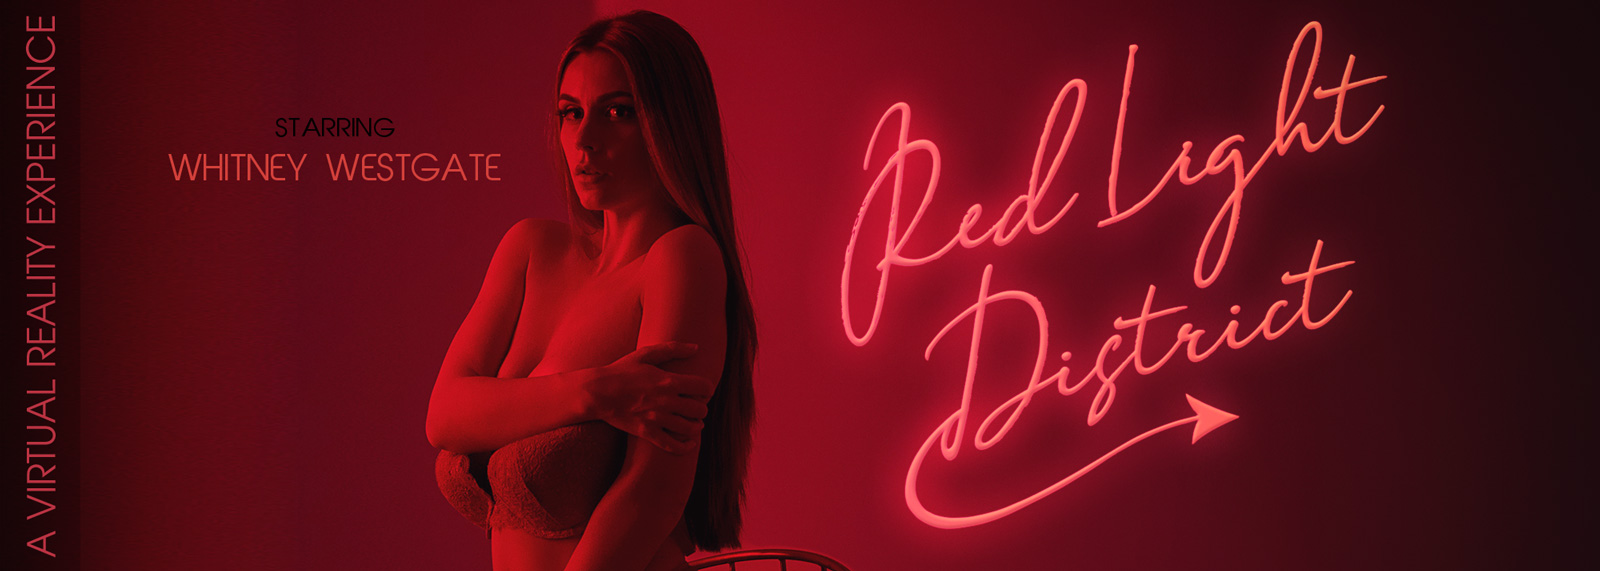 Www Red Video Com - Red Light District with Whitney Westgate VR Porn Video in 4K-8K | VR Bangers